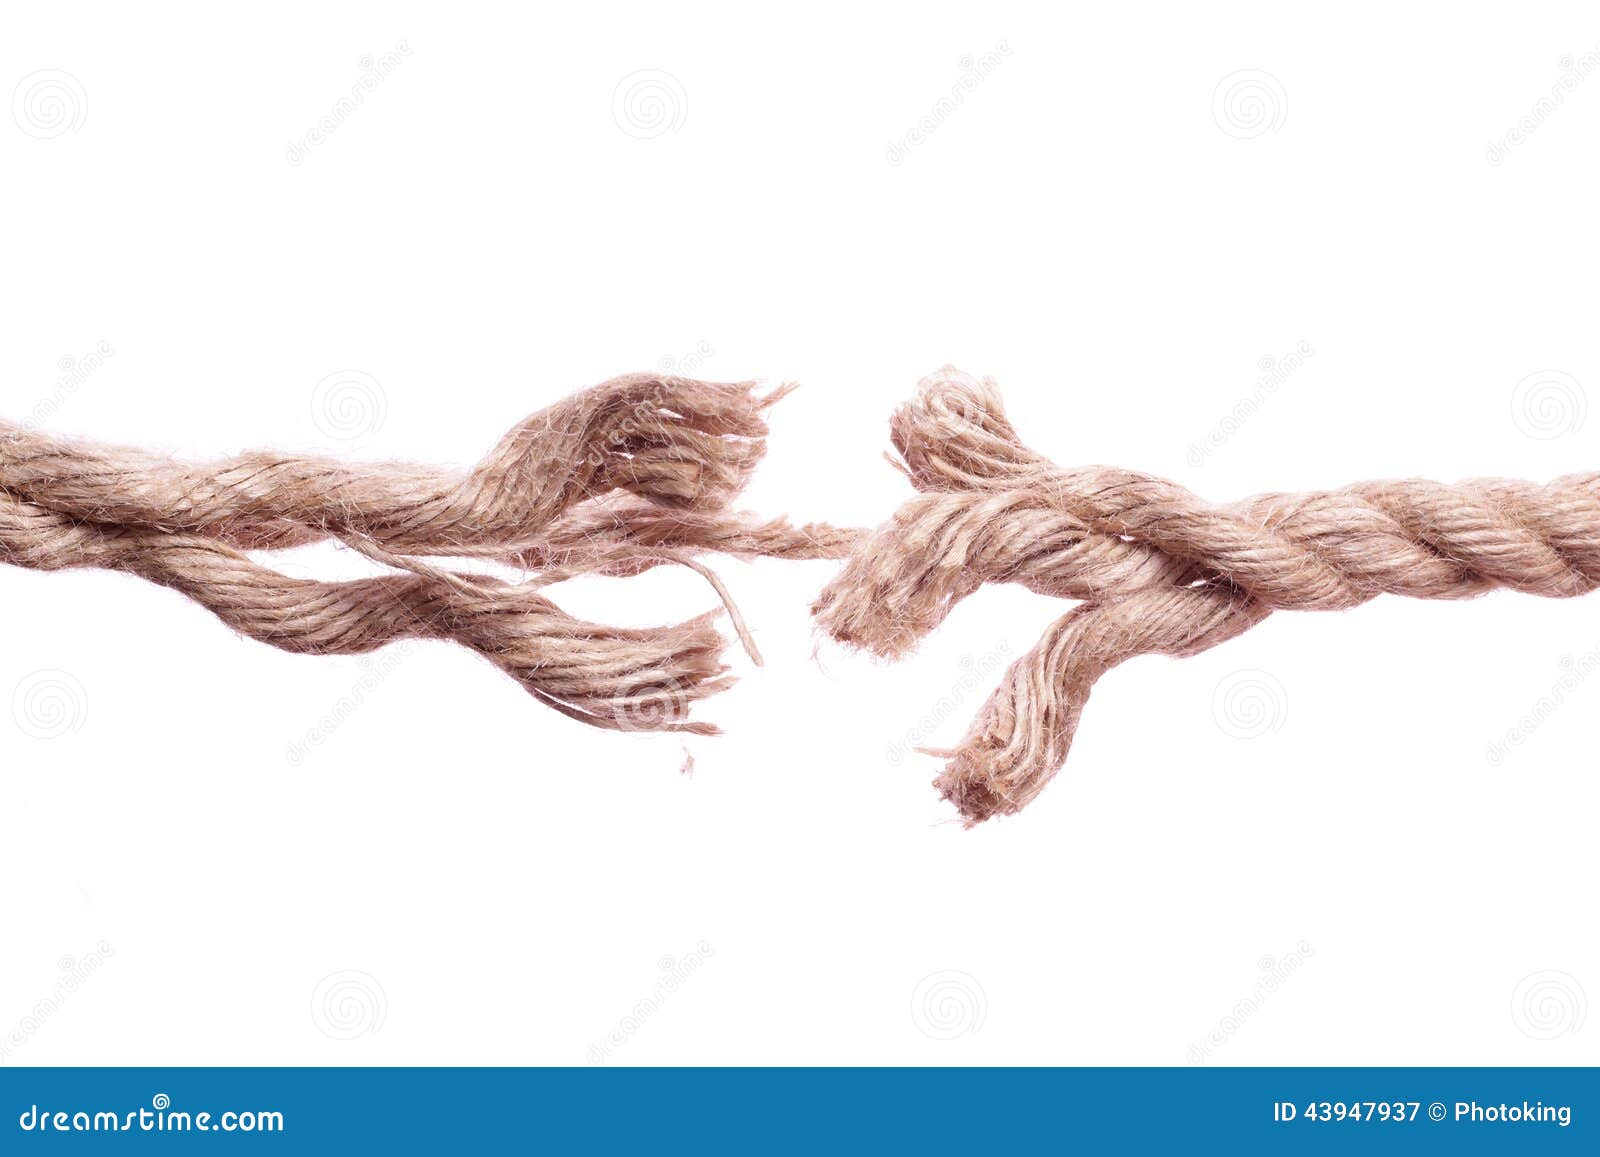 frayed rope about to break